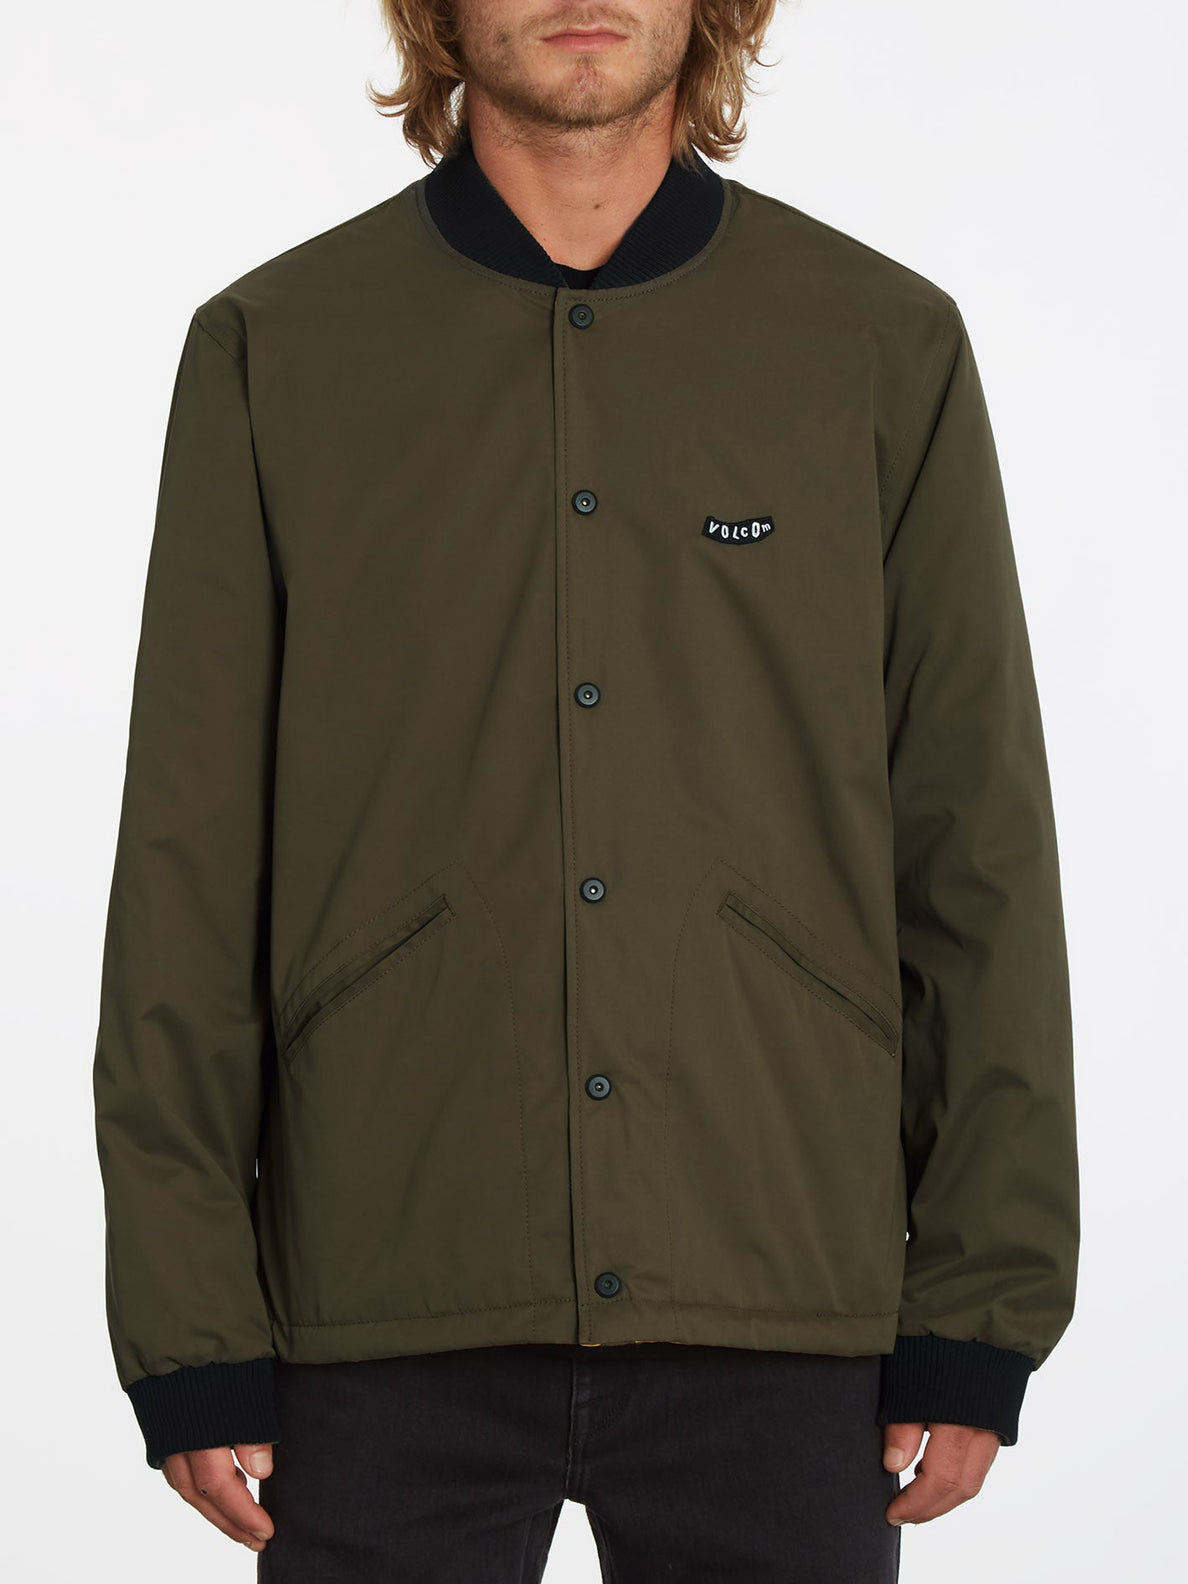 Lookster Jacket (Reversible) - SERVICE GREEN (A1632007_SVG) [F]